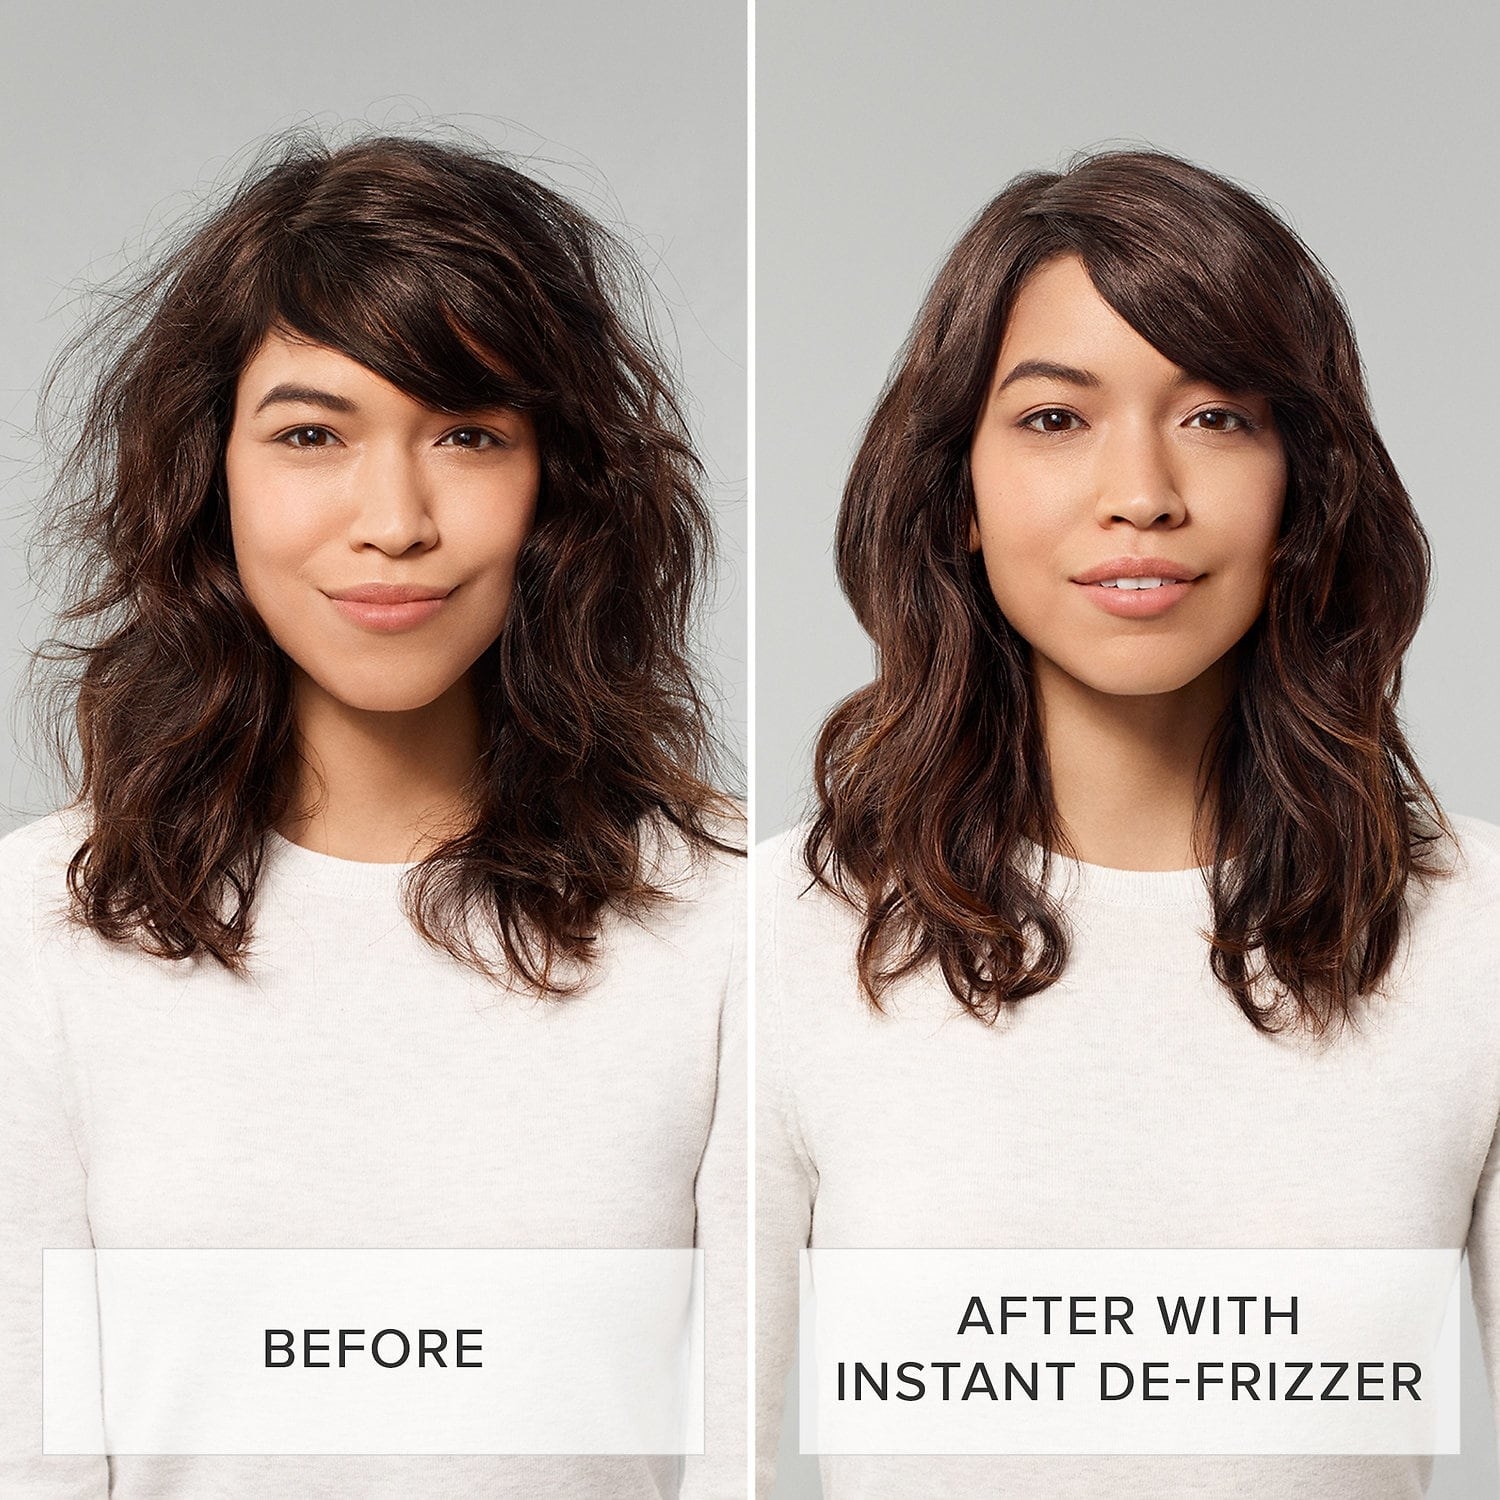 A model before and after use: on the left with frizzier, tousled hair and on the right with sleek, shiny waves